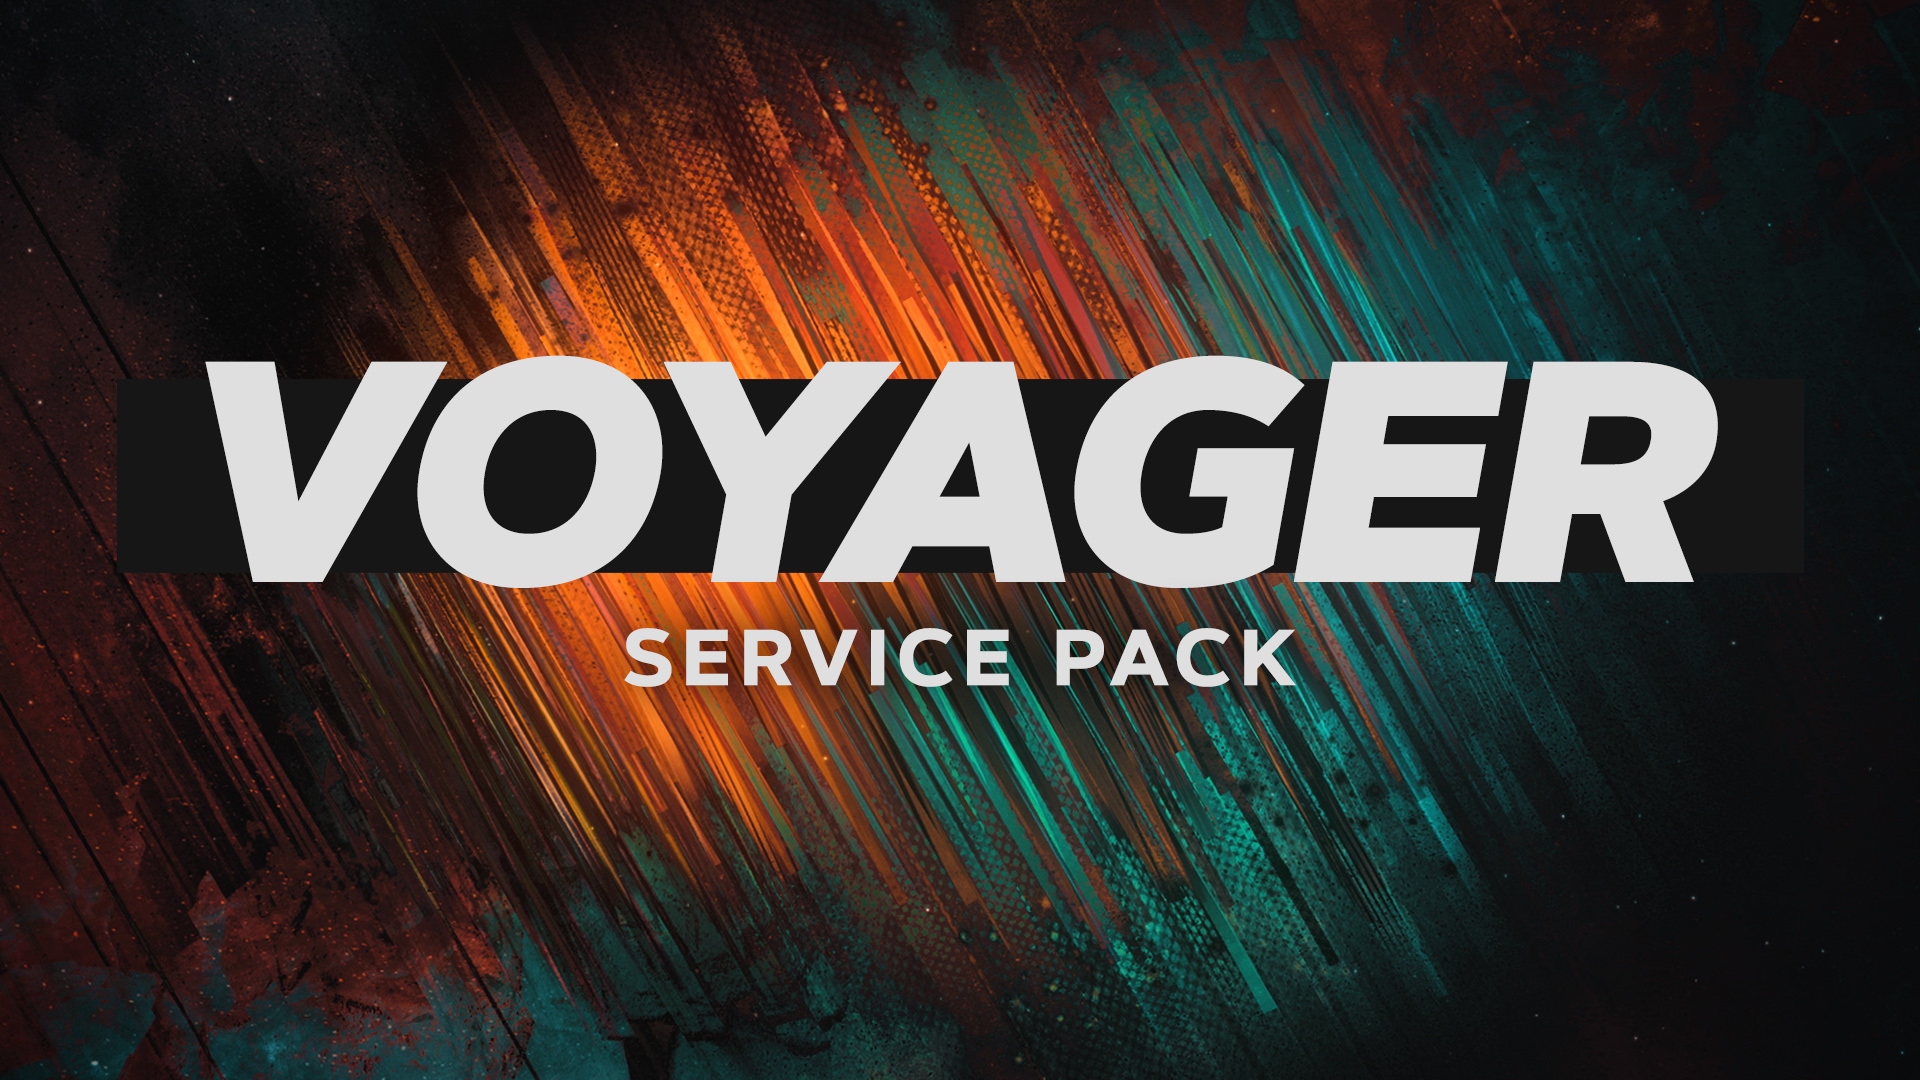 Voyager Service Pack